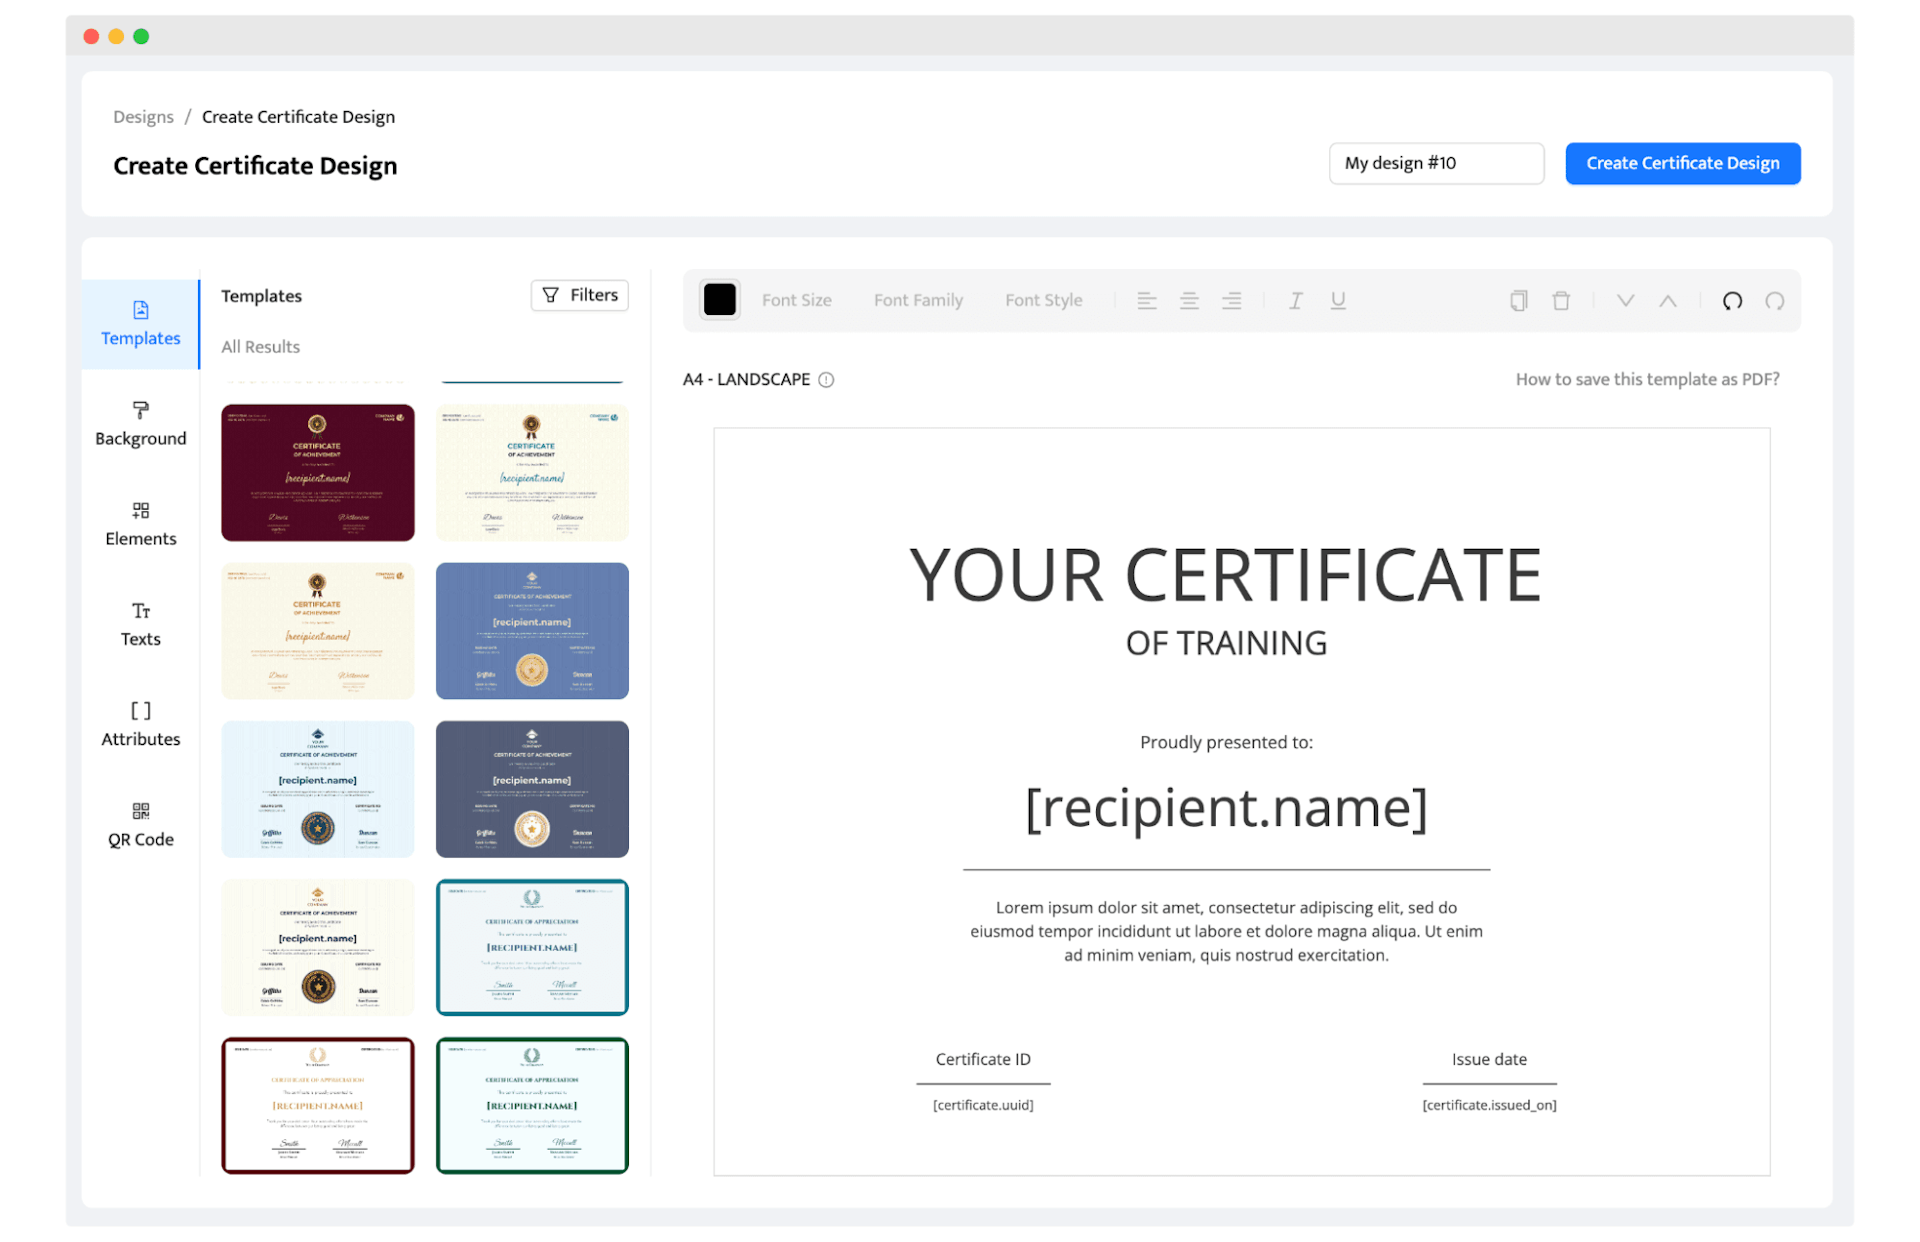 Blank certificate template in Certifier dashboard to create your own training certificate template.